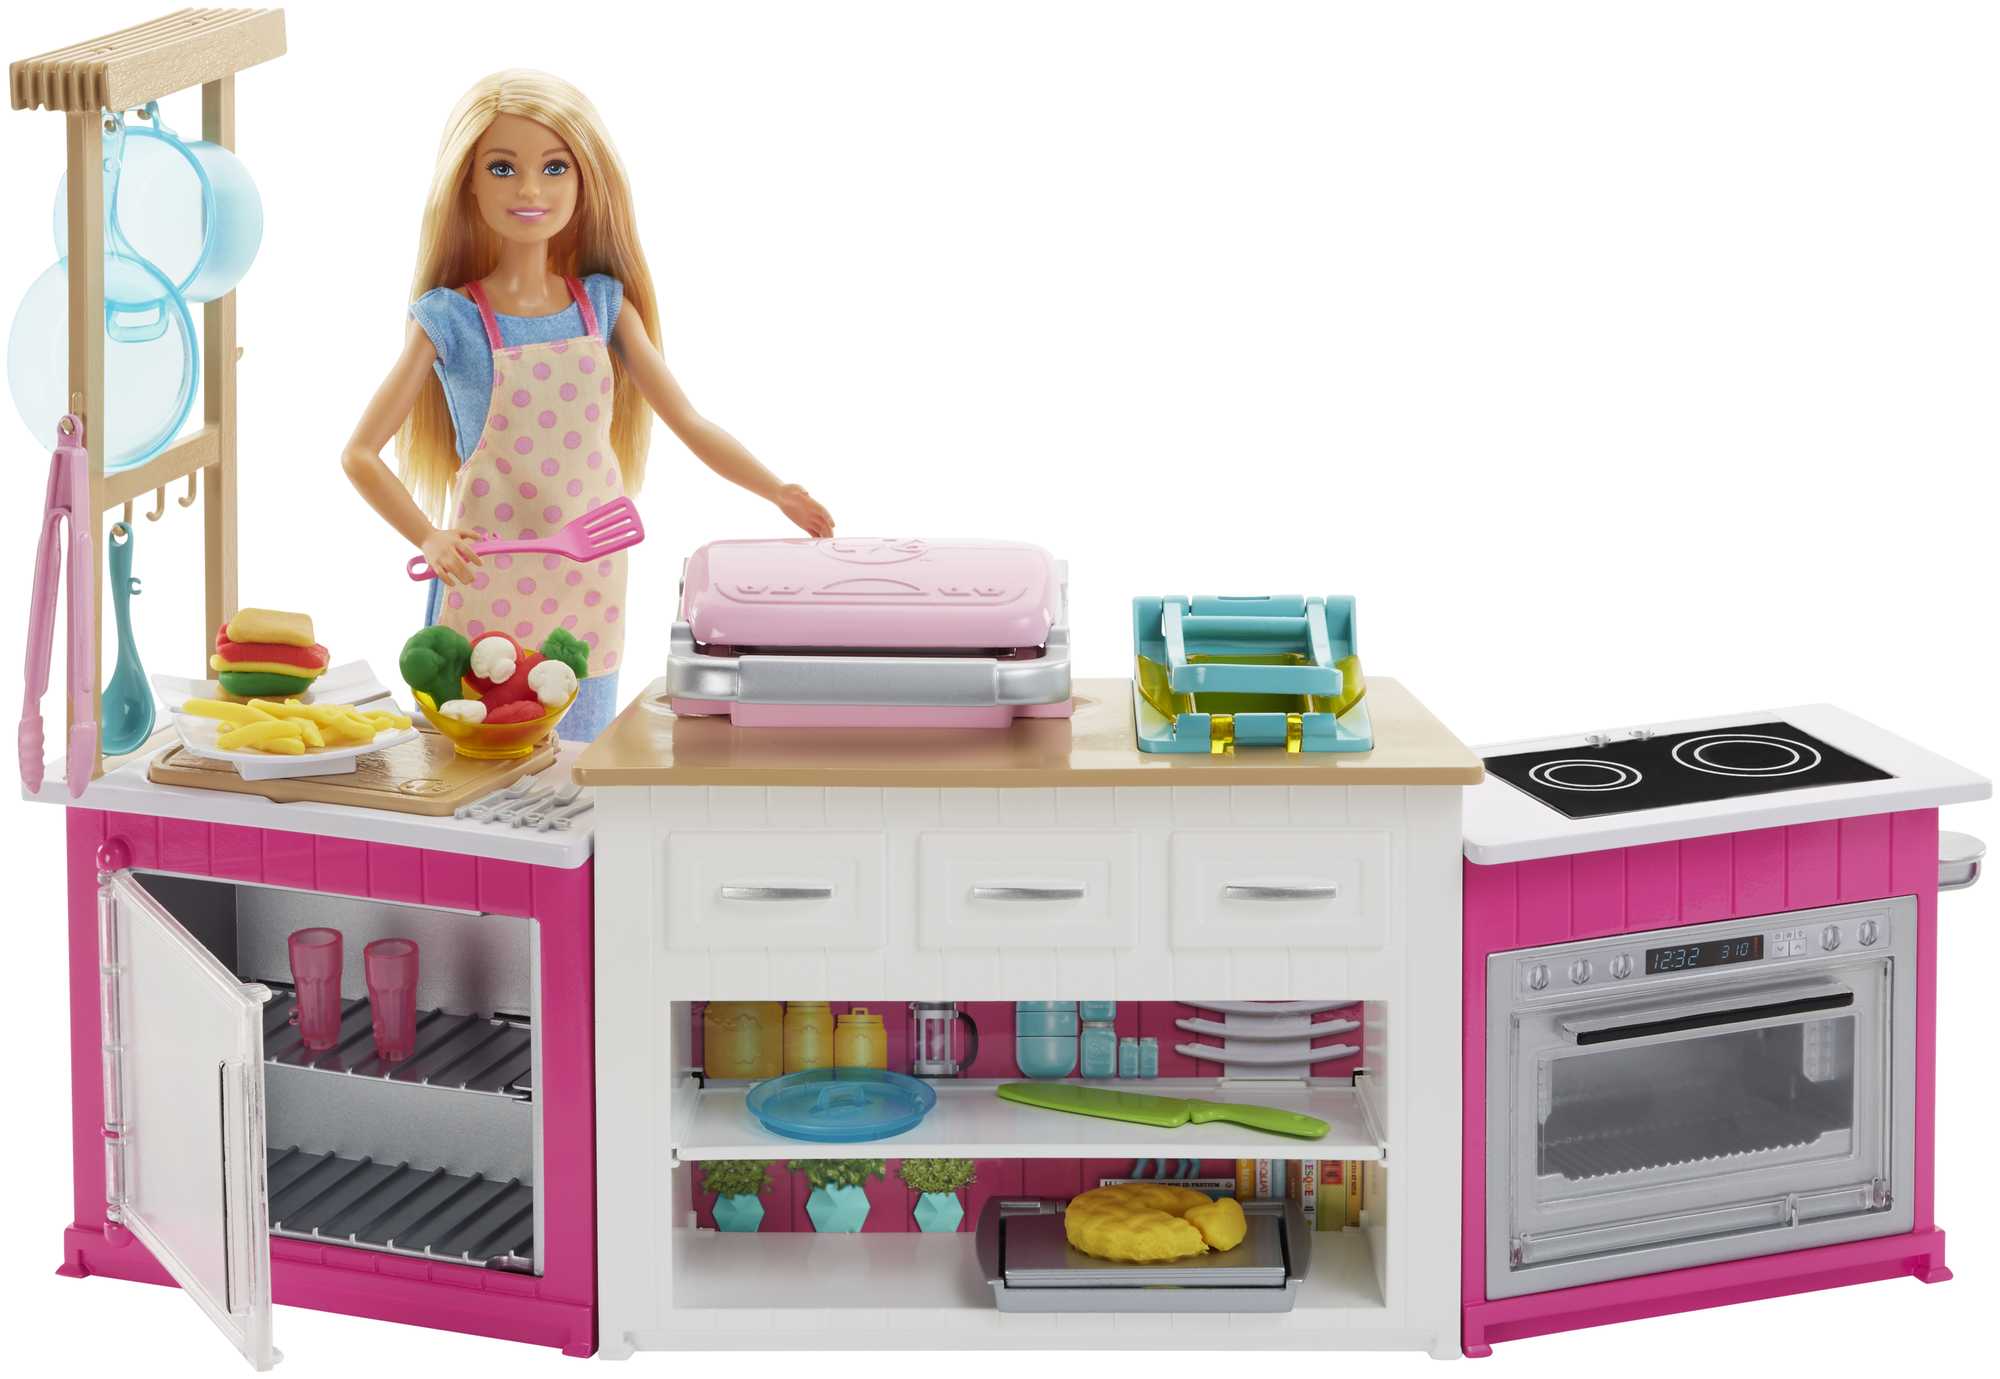  Barbie Doll and Playset : Toys & Games